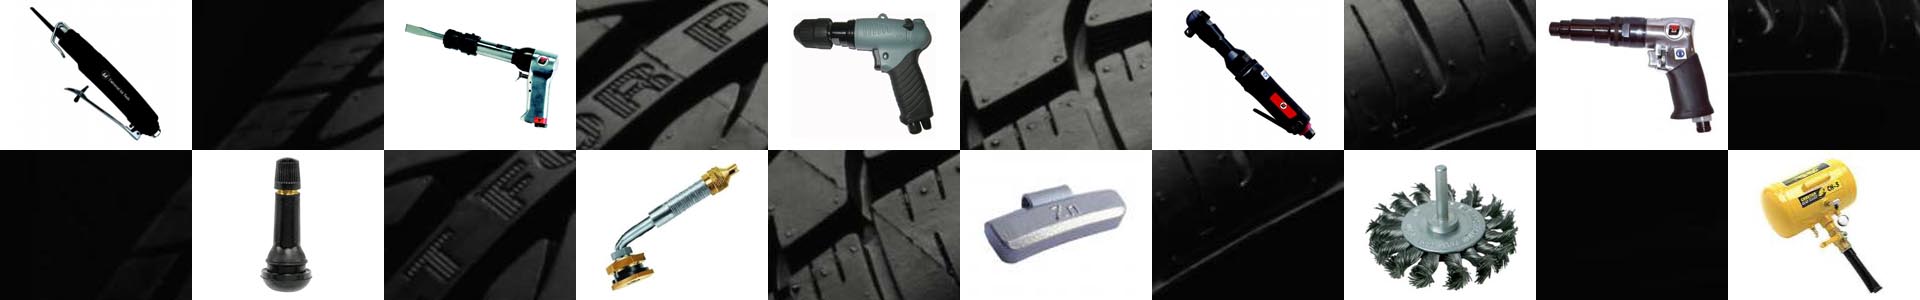 Tyre Levers Tools - Professional Tyre Levers